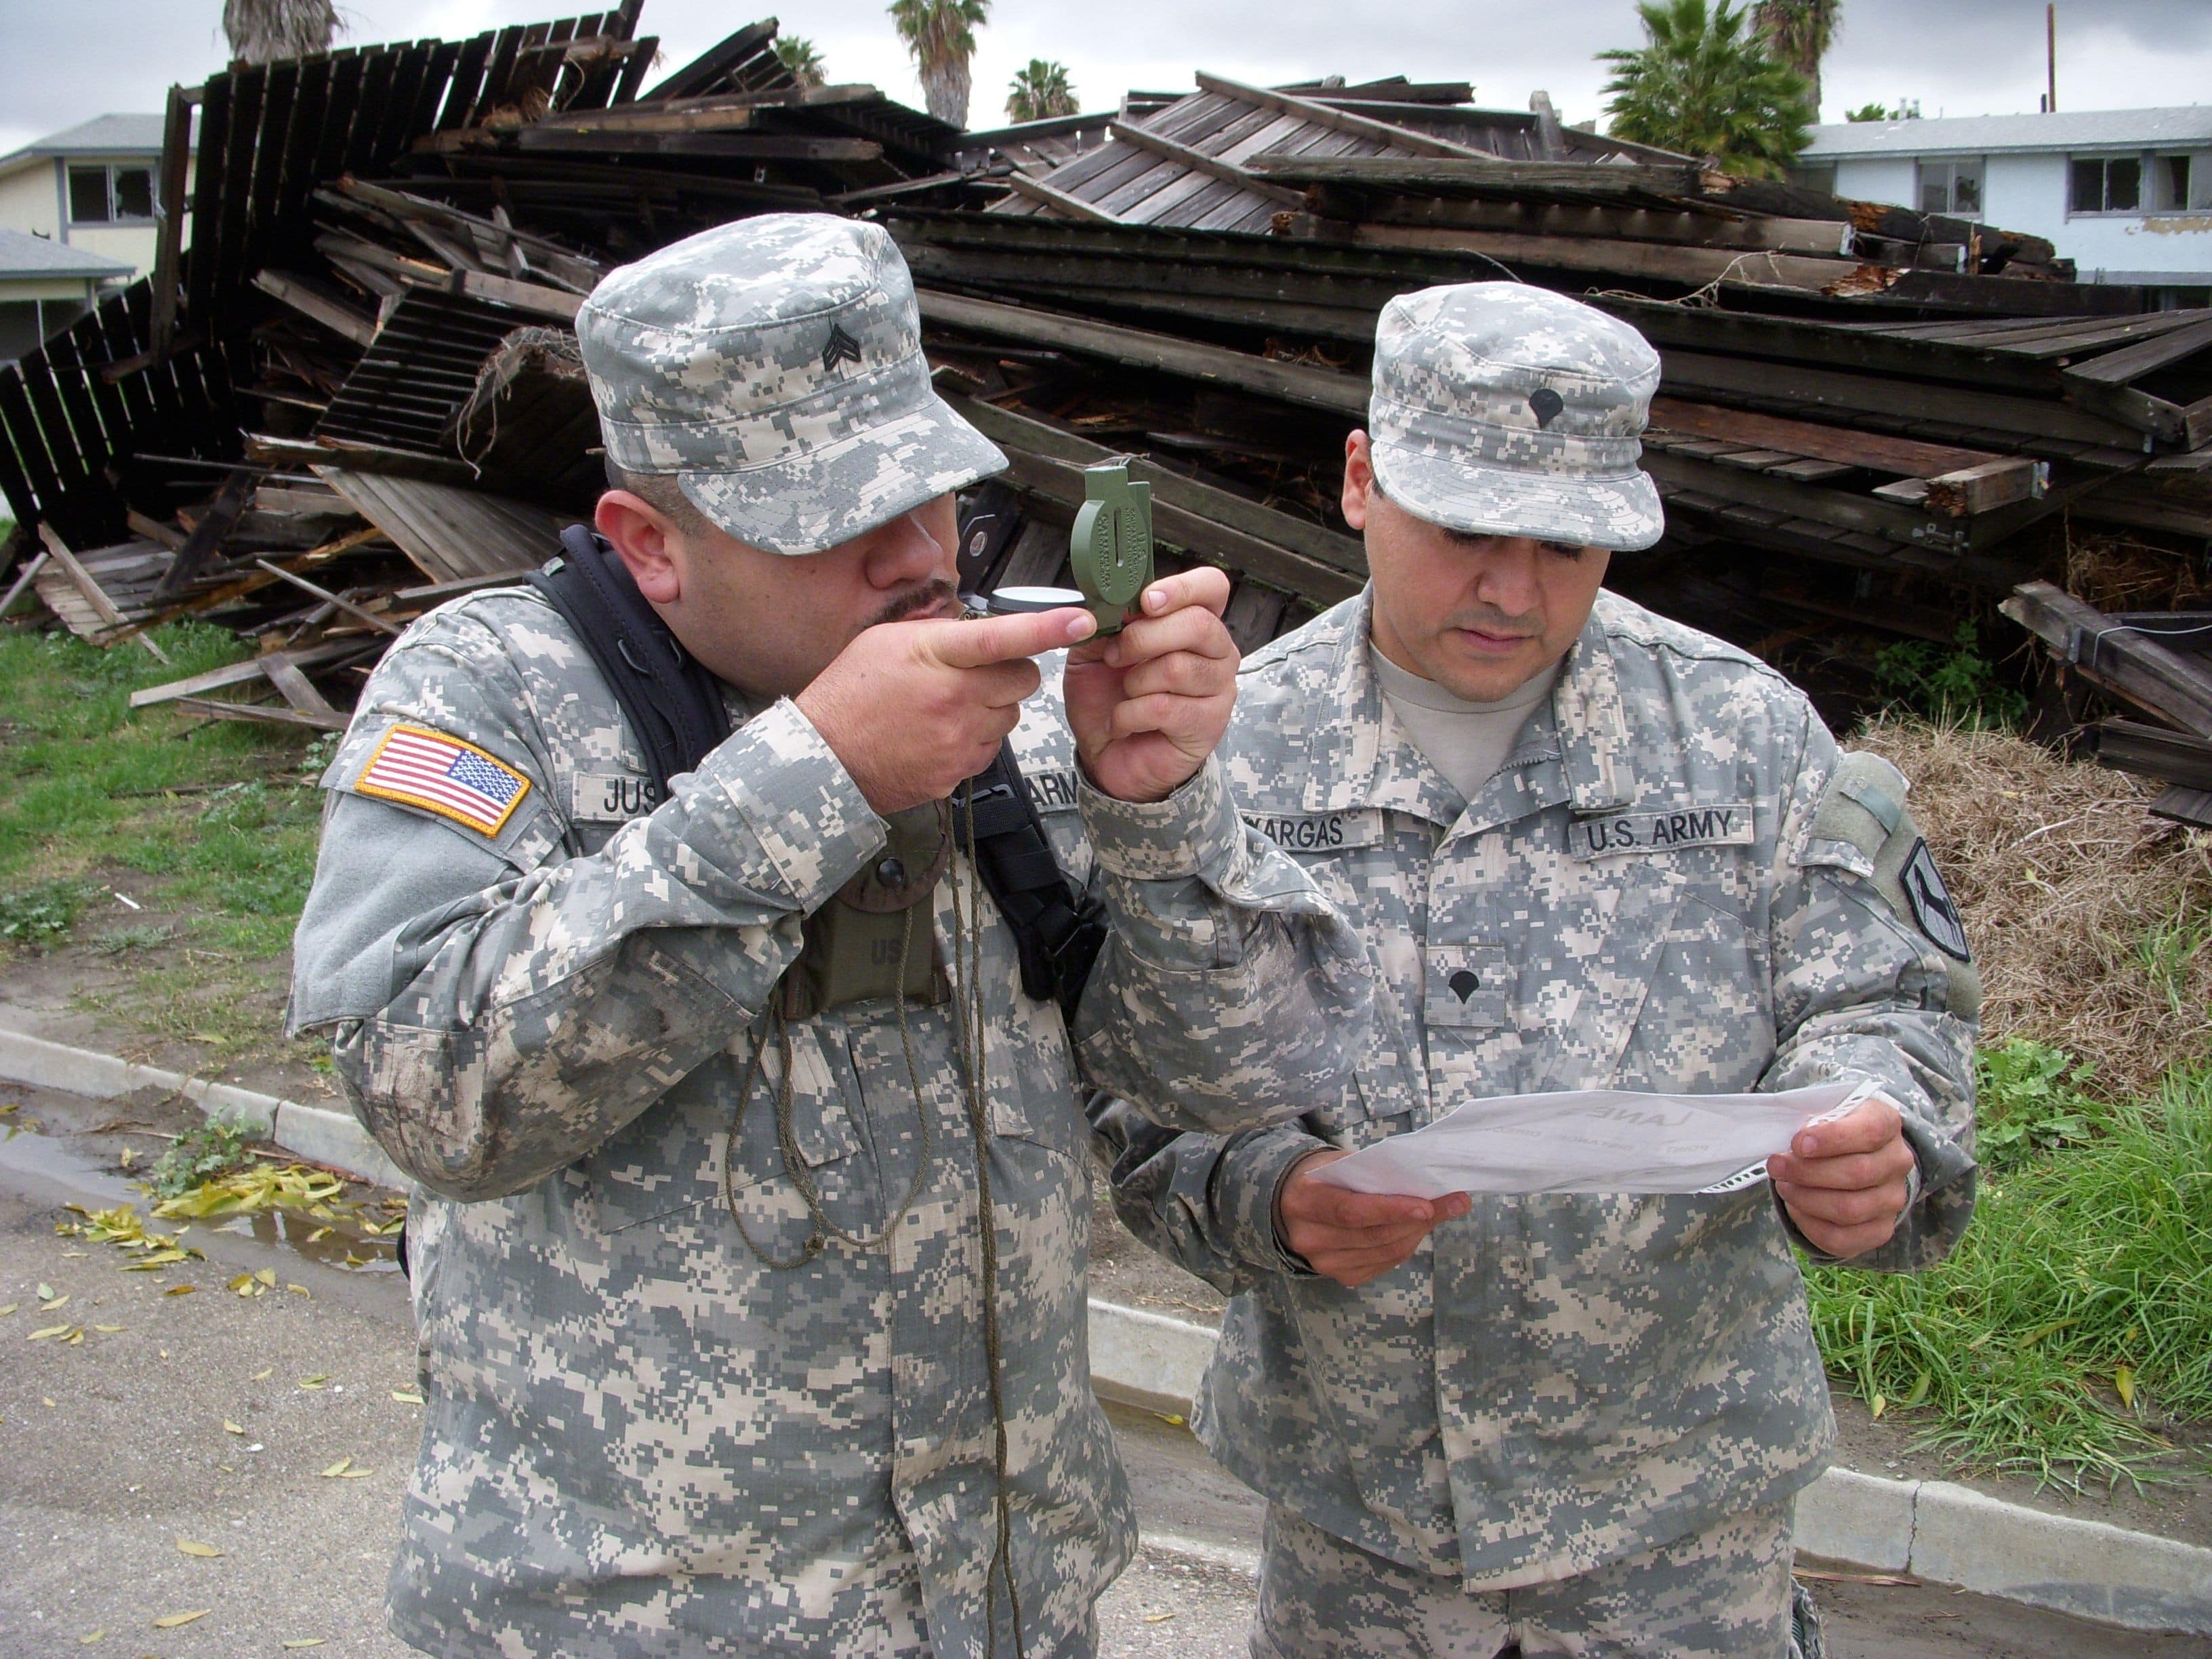 Staff Sergeant not only taught the classroom portion of LAND NAV, but he set up a land navigation course in the Military Operations Urban Terrain area.